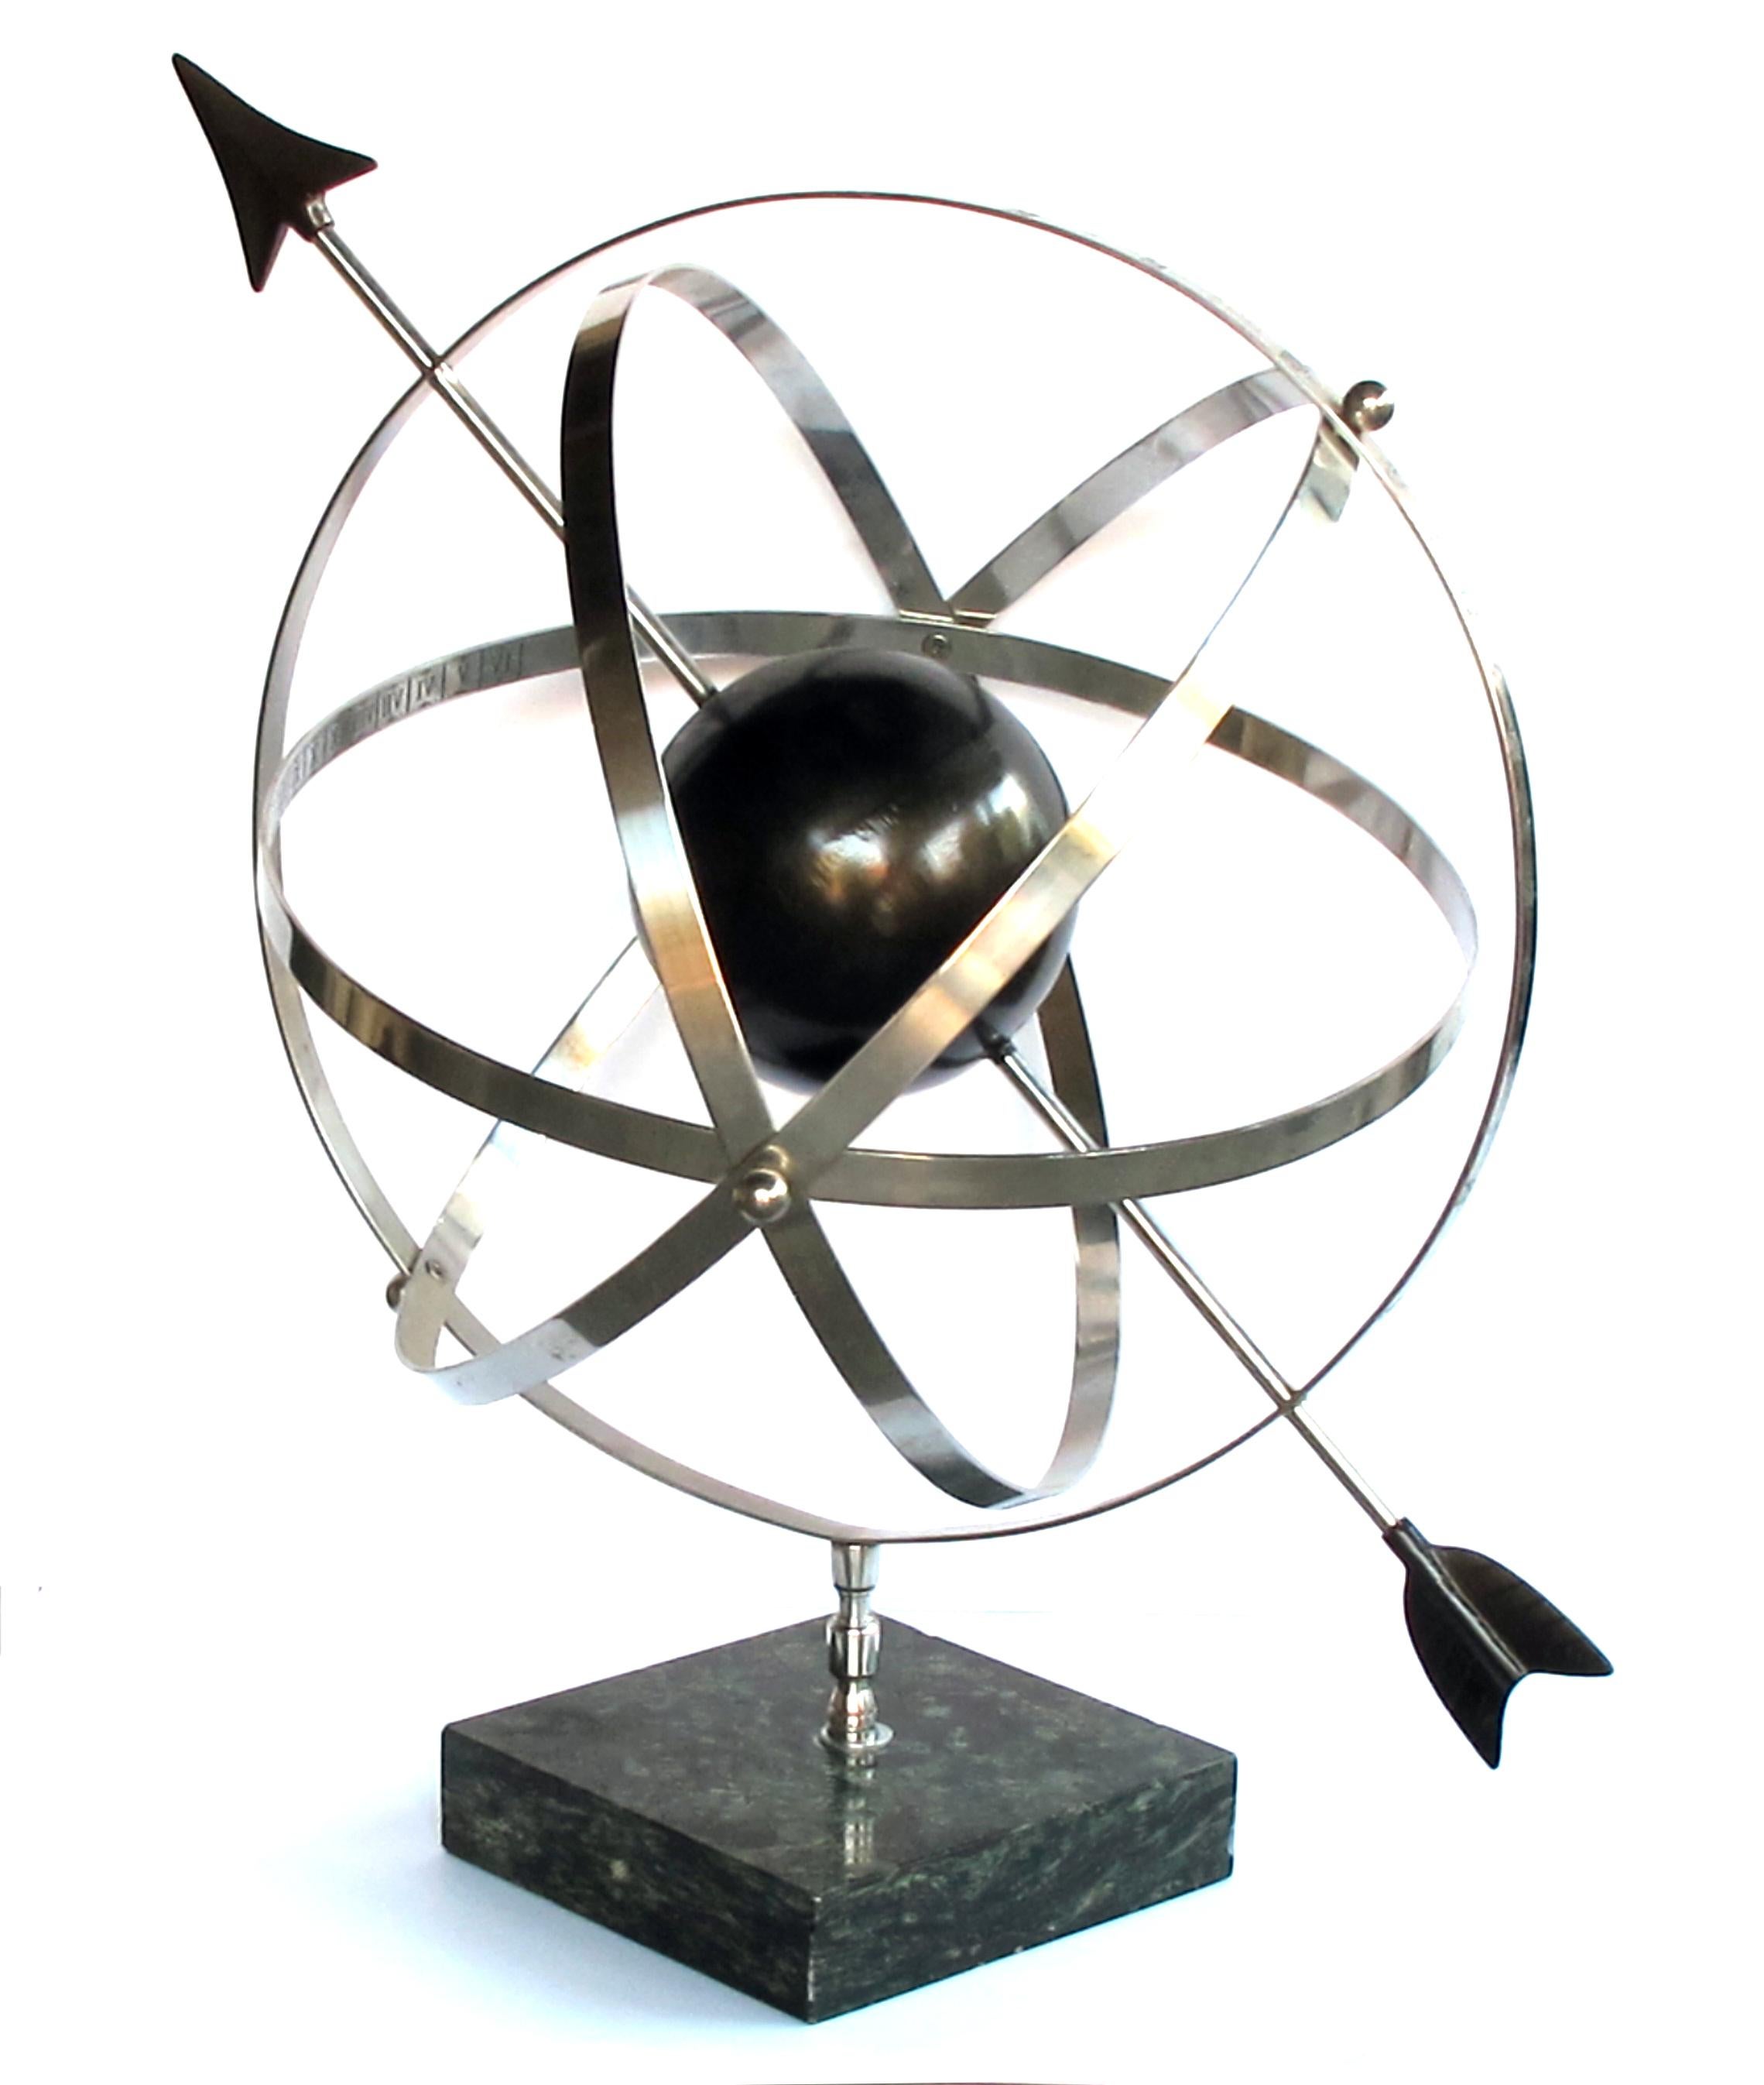 Composed of movable steel rings incised with signs of the zodiac and Roman numerals; resting on a square marble base; an armillary sphere is a tool that can be used to solve various astronomical problems or as an educational tool to represent